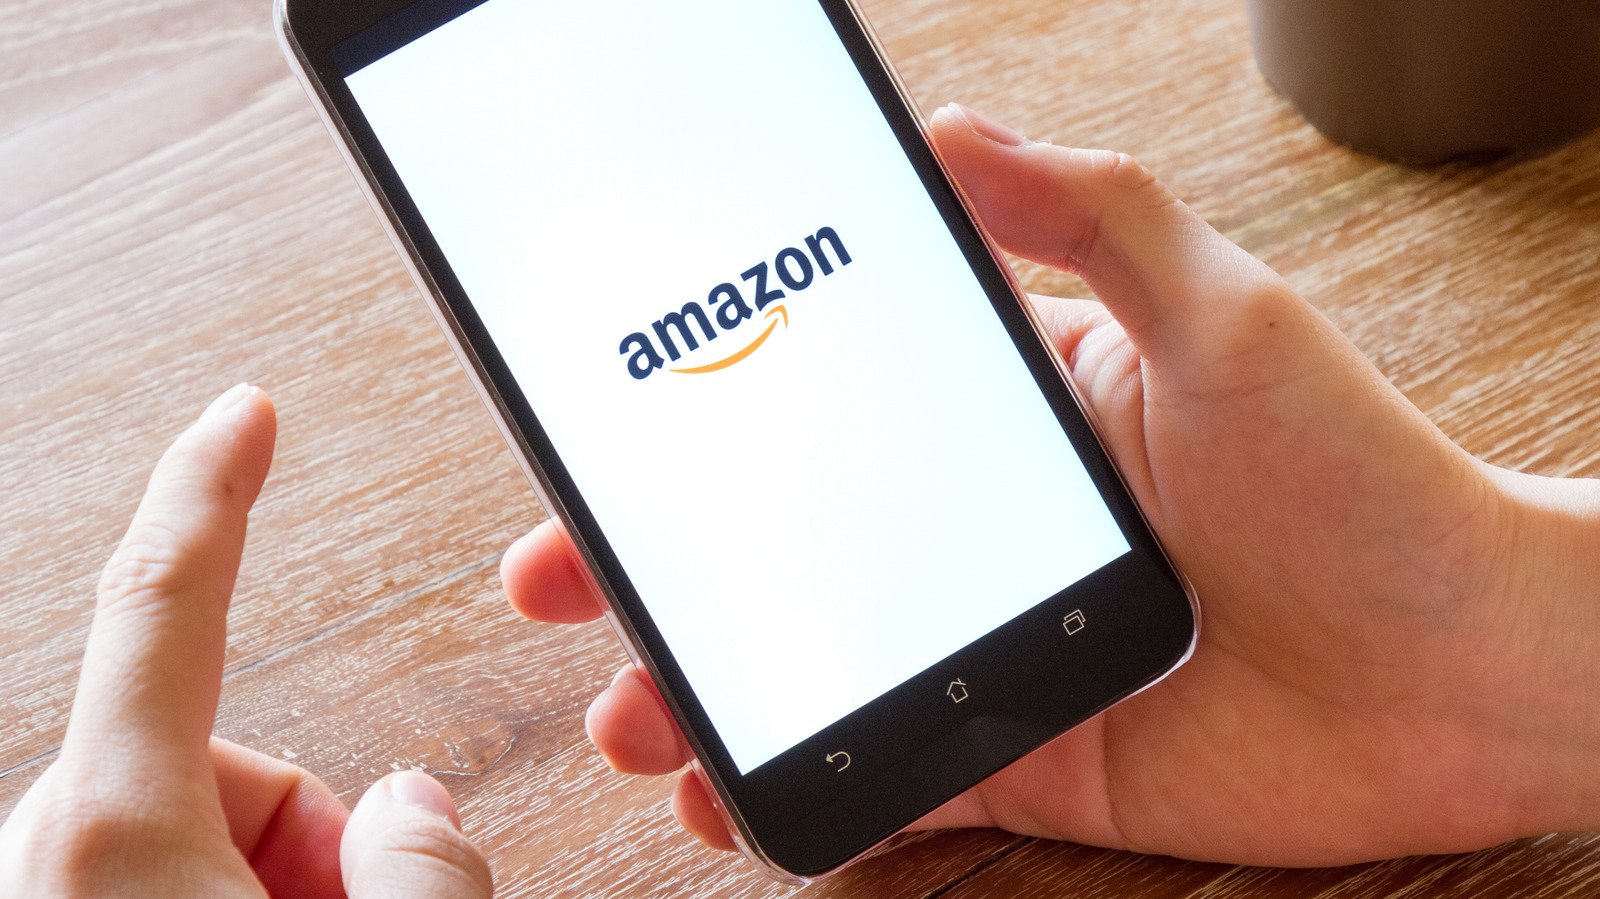 Amazon's Shopping App May Soon Seem A Bit More Intrusive Thanks To Generative AI